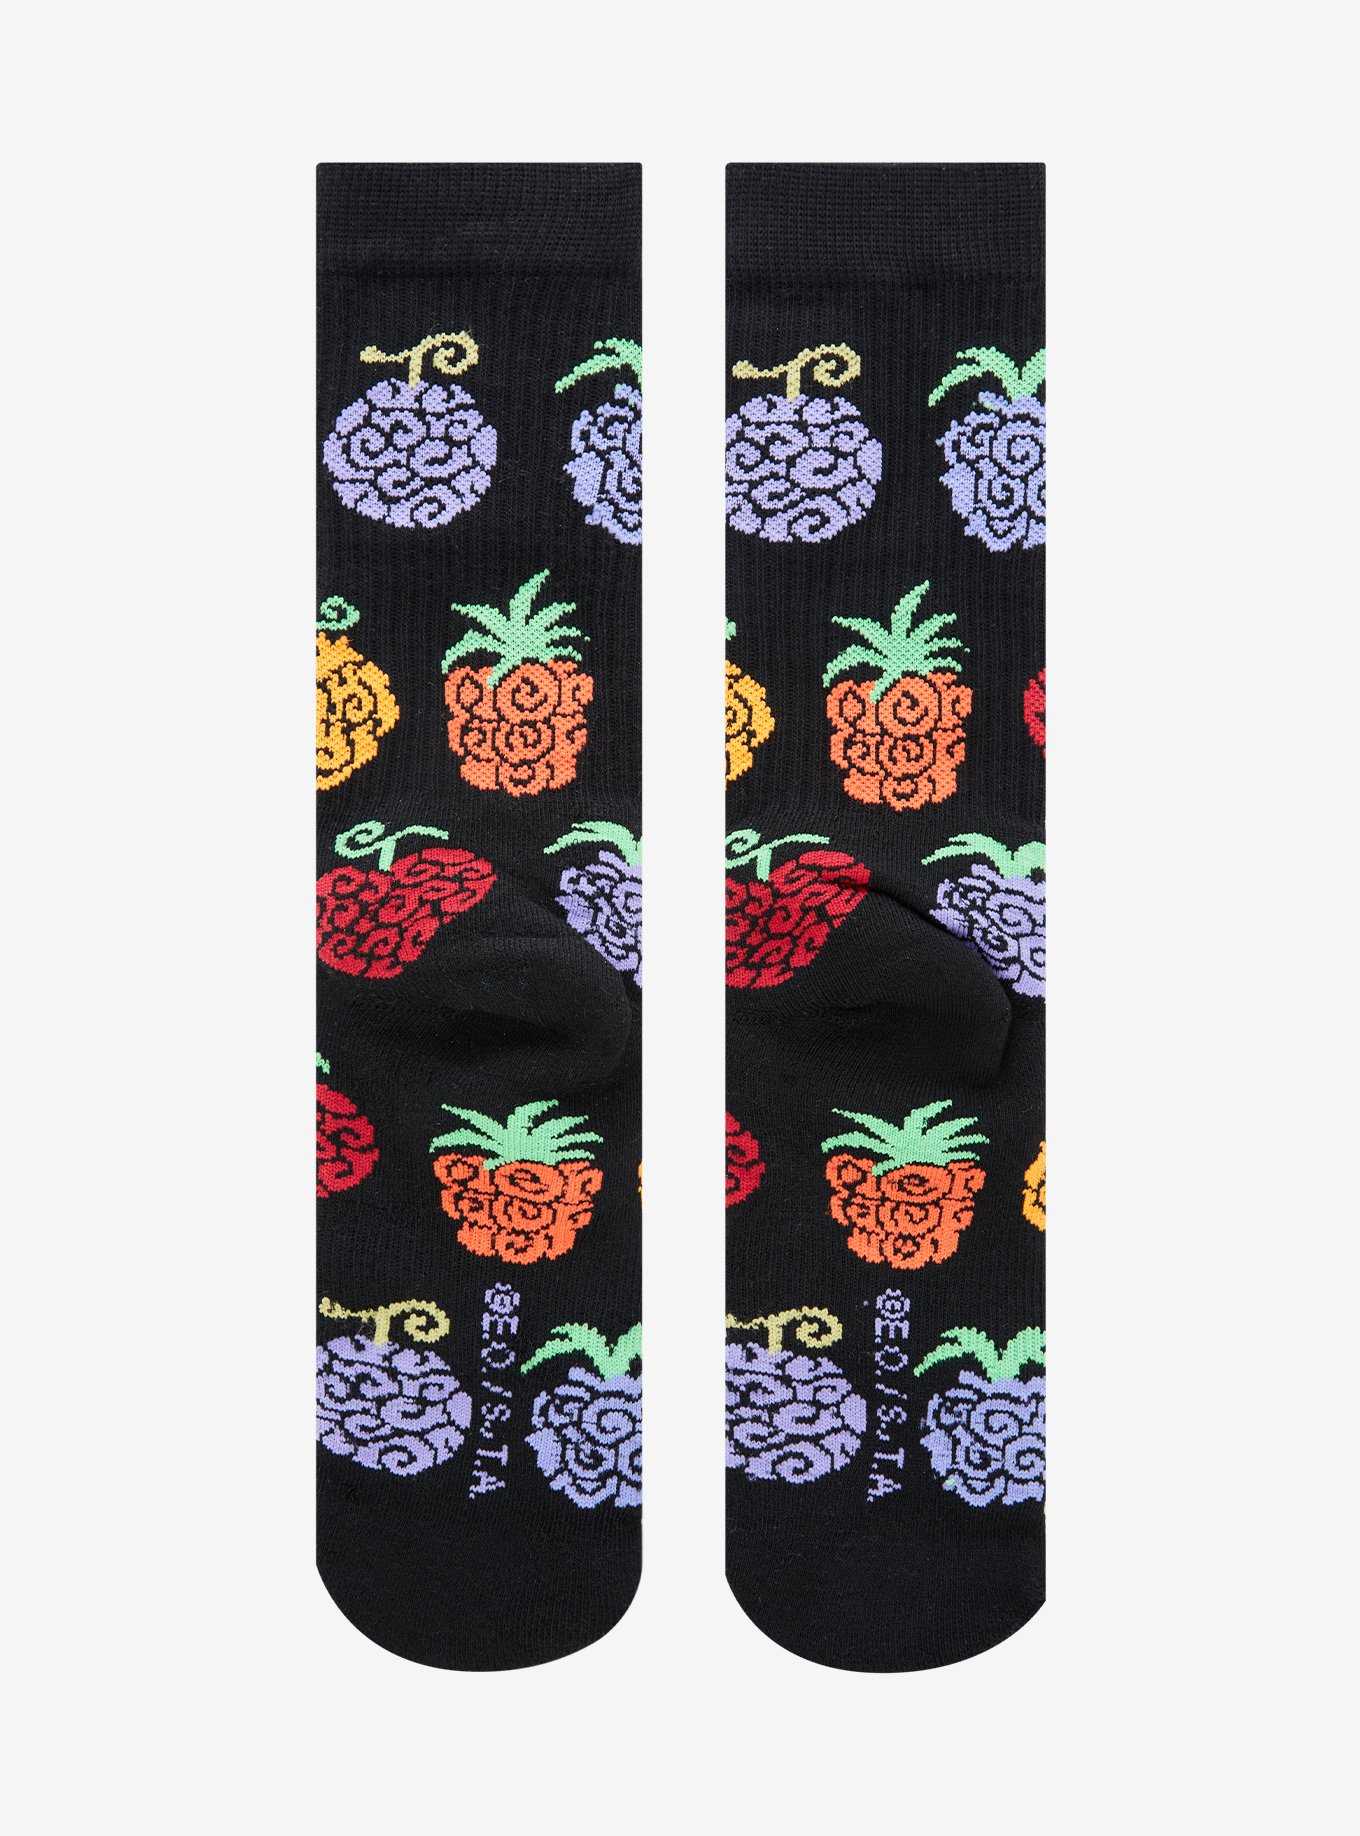 One Piece Devil Fruit Allover Print Crew Socks - BoxLunch Exclusive, , hi-res